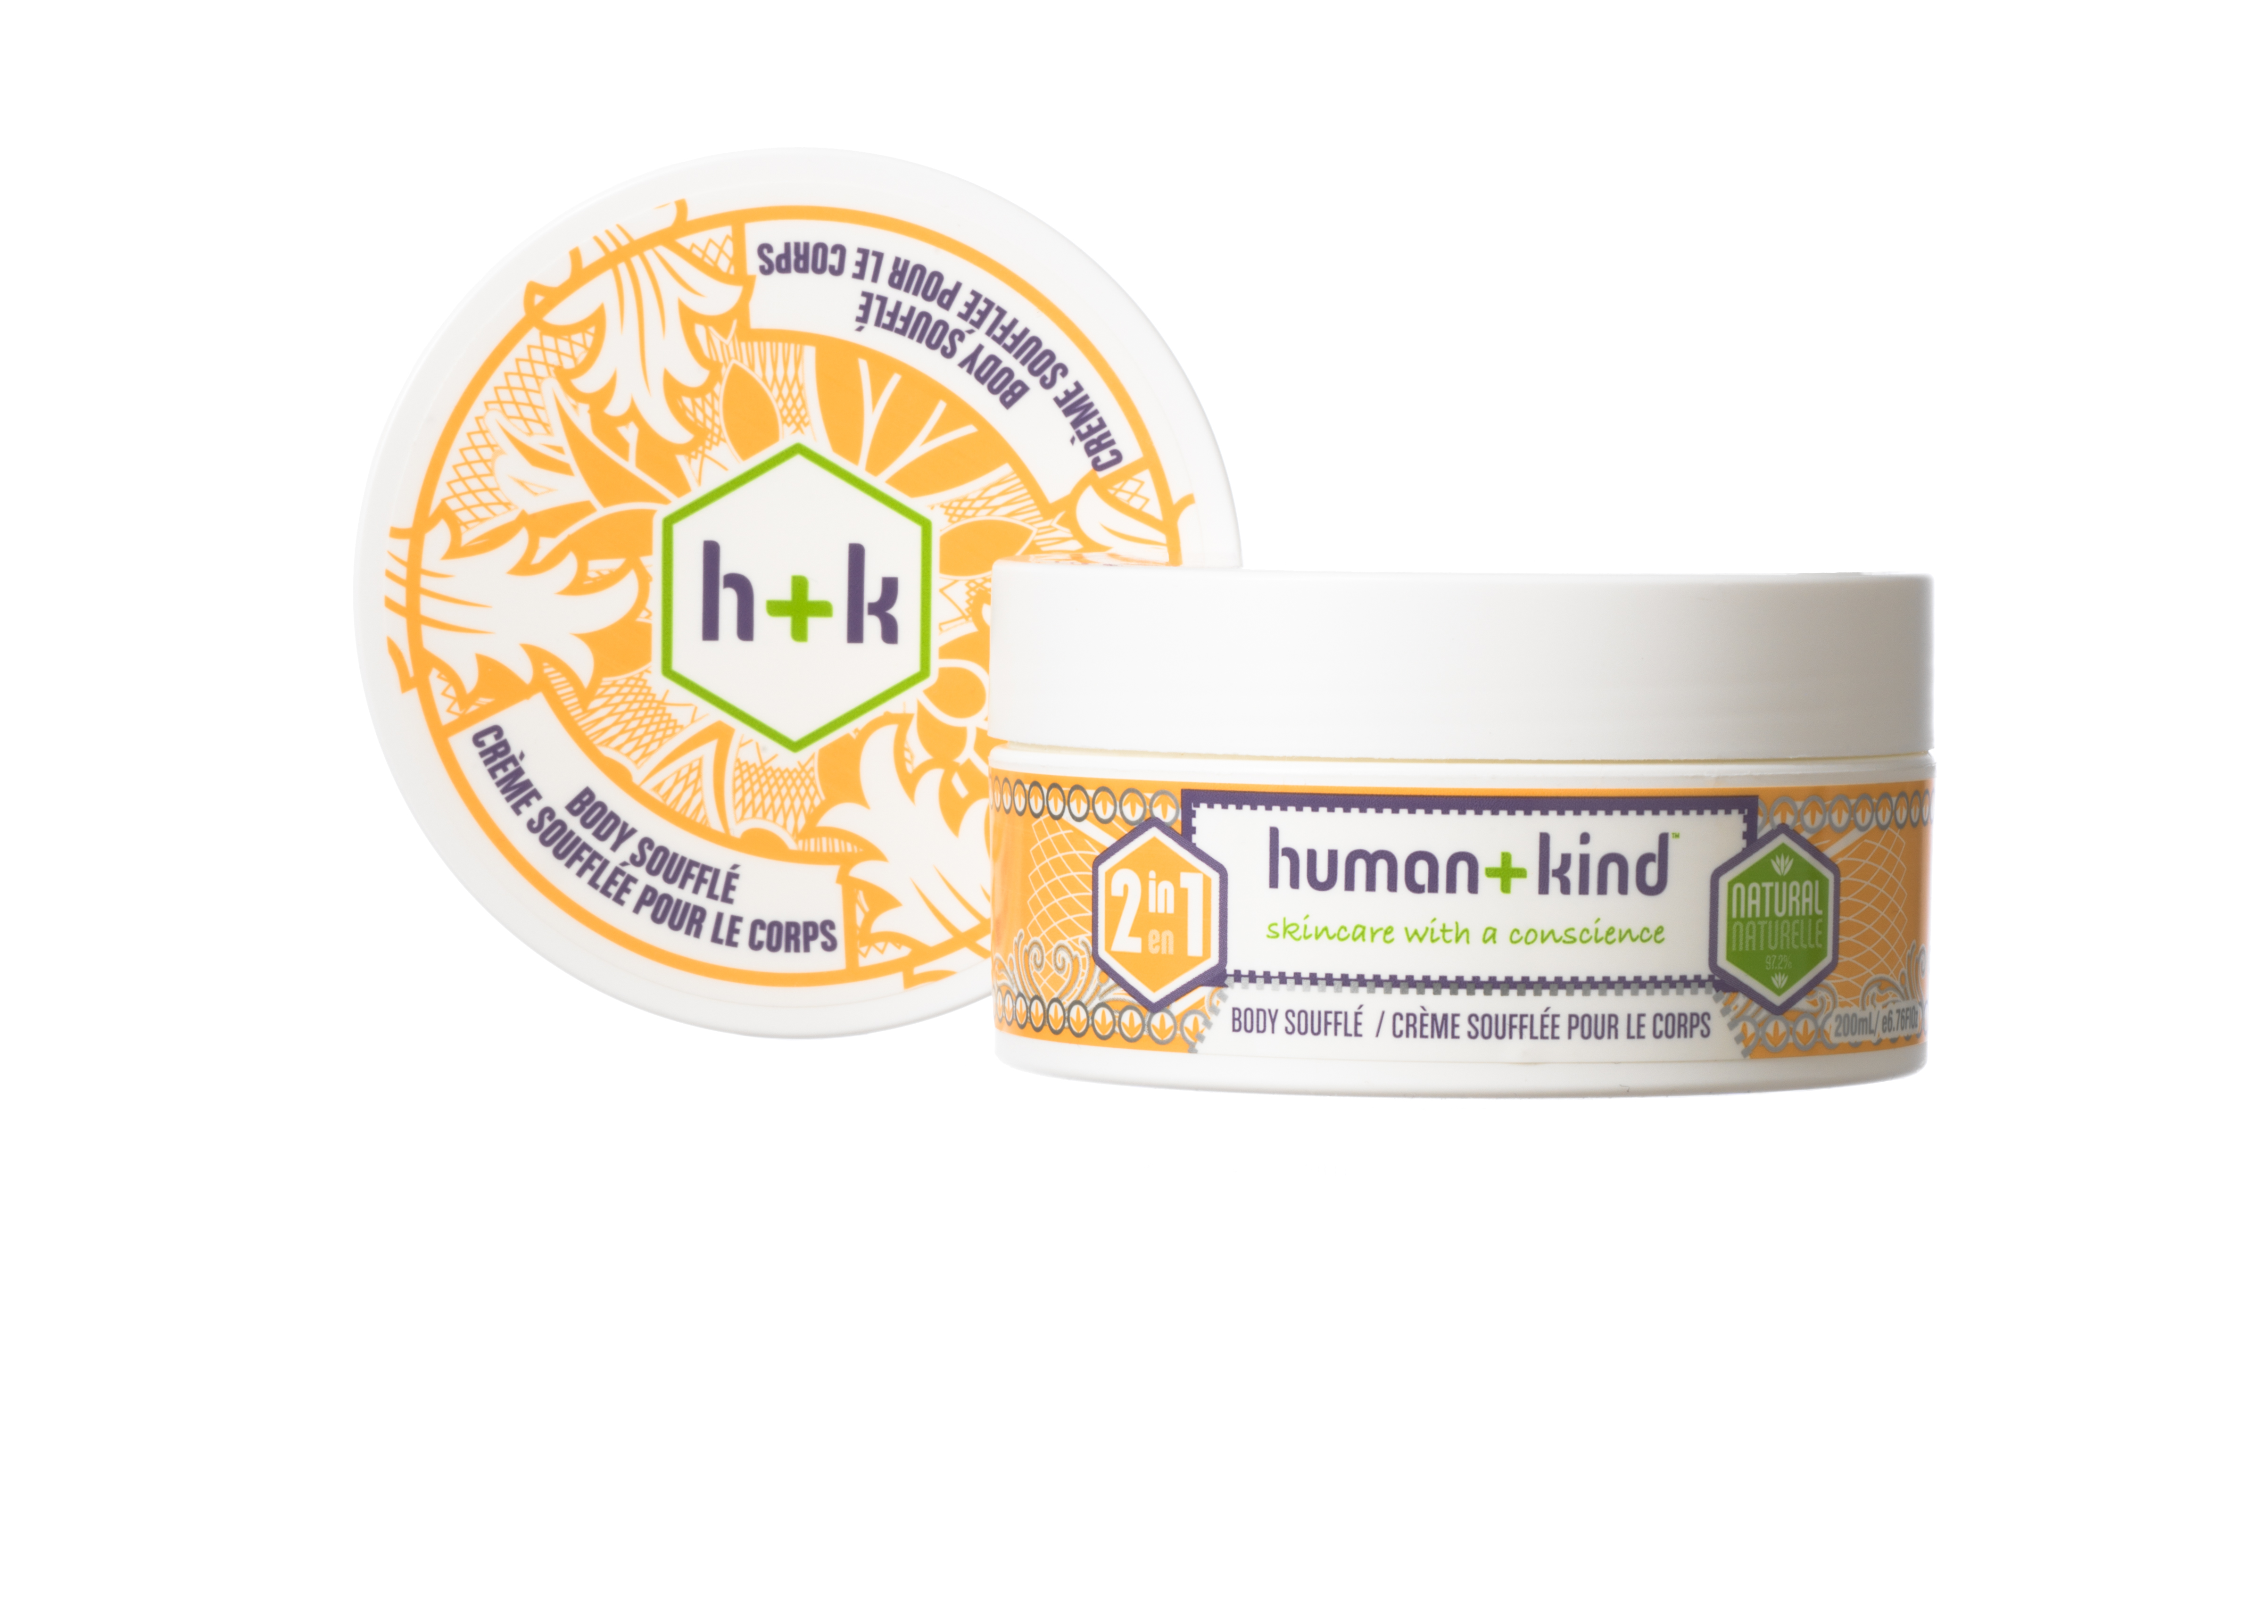 Body Souffle Human and kind mothers day present